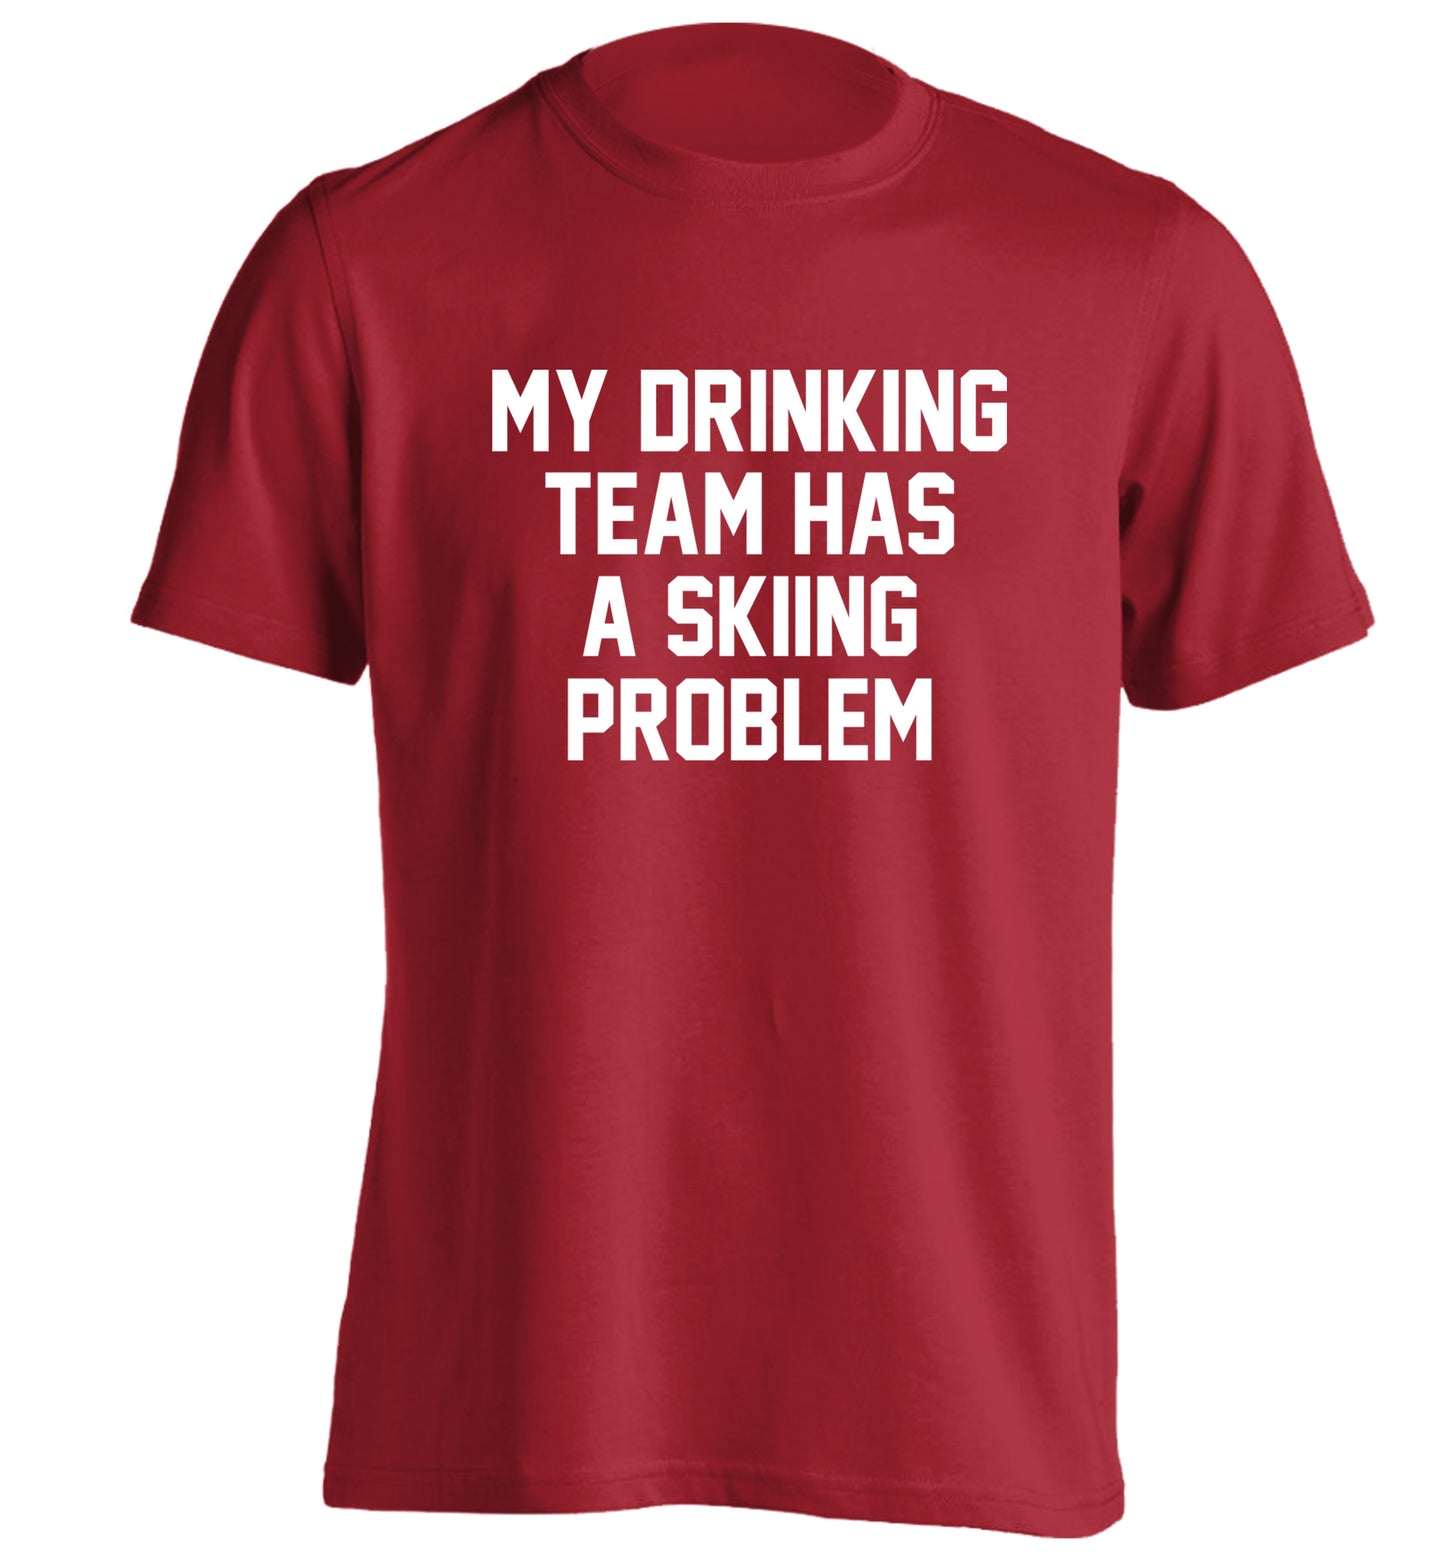 My drinking team has a skiing problem adults unisexred Tshirt 2XL